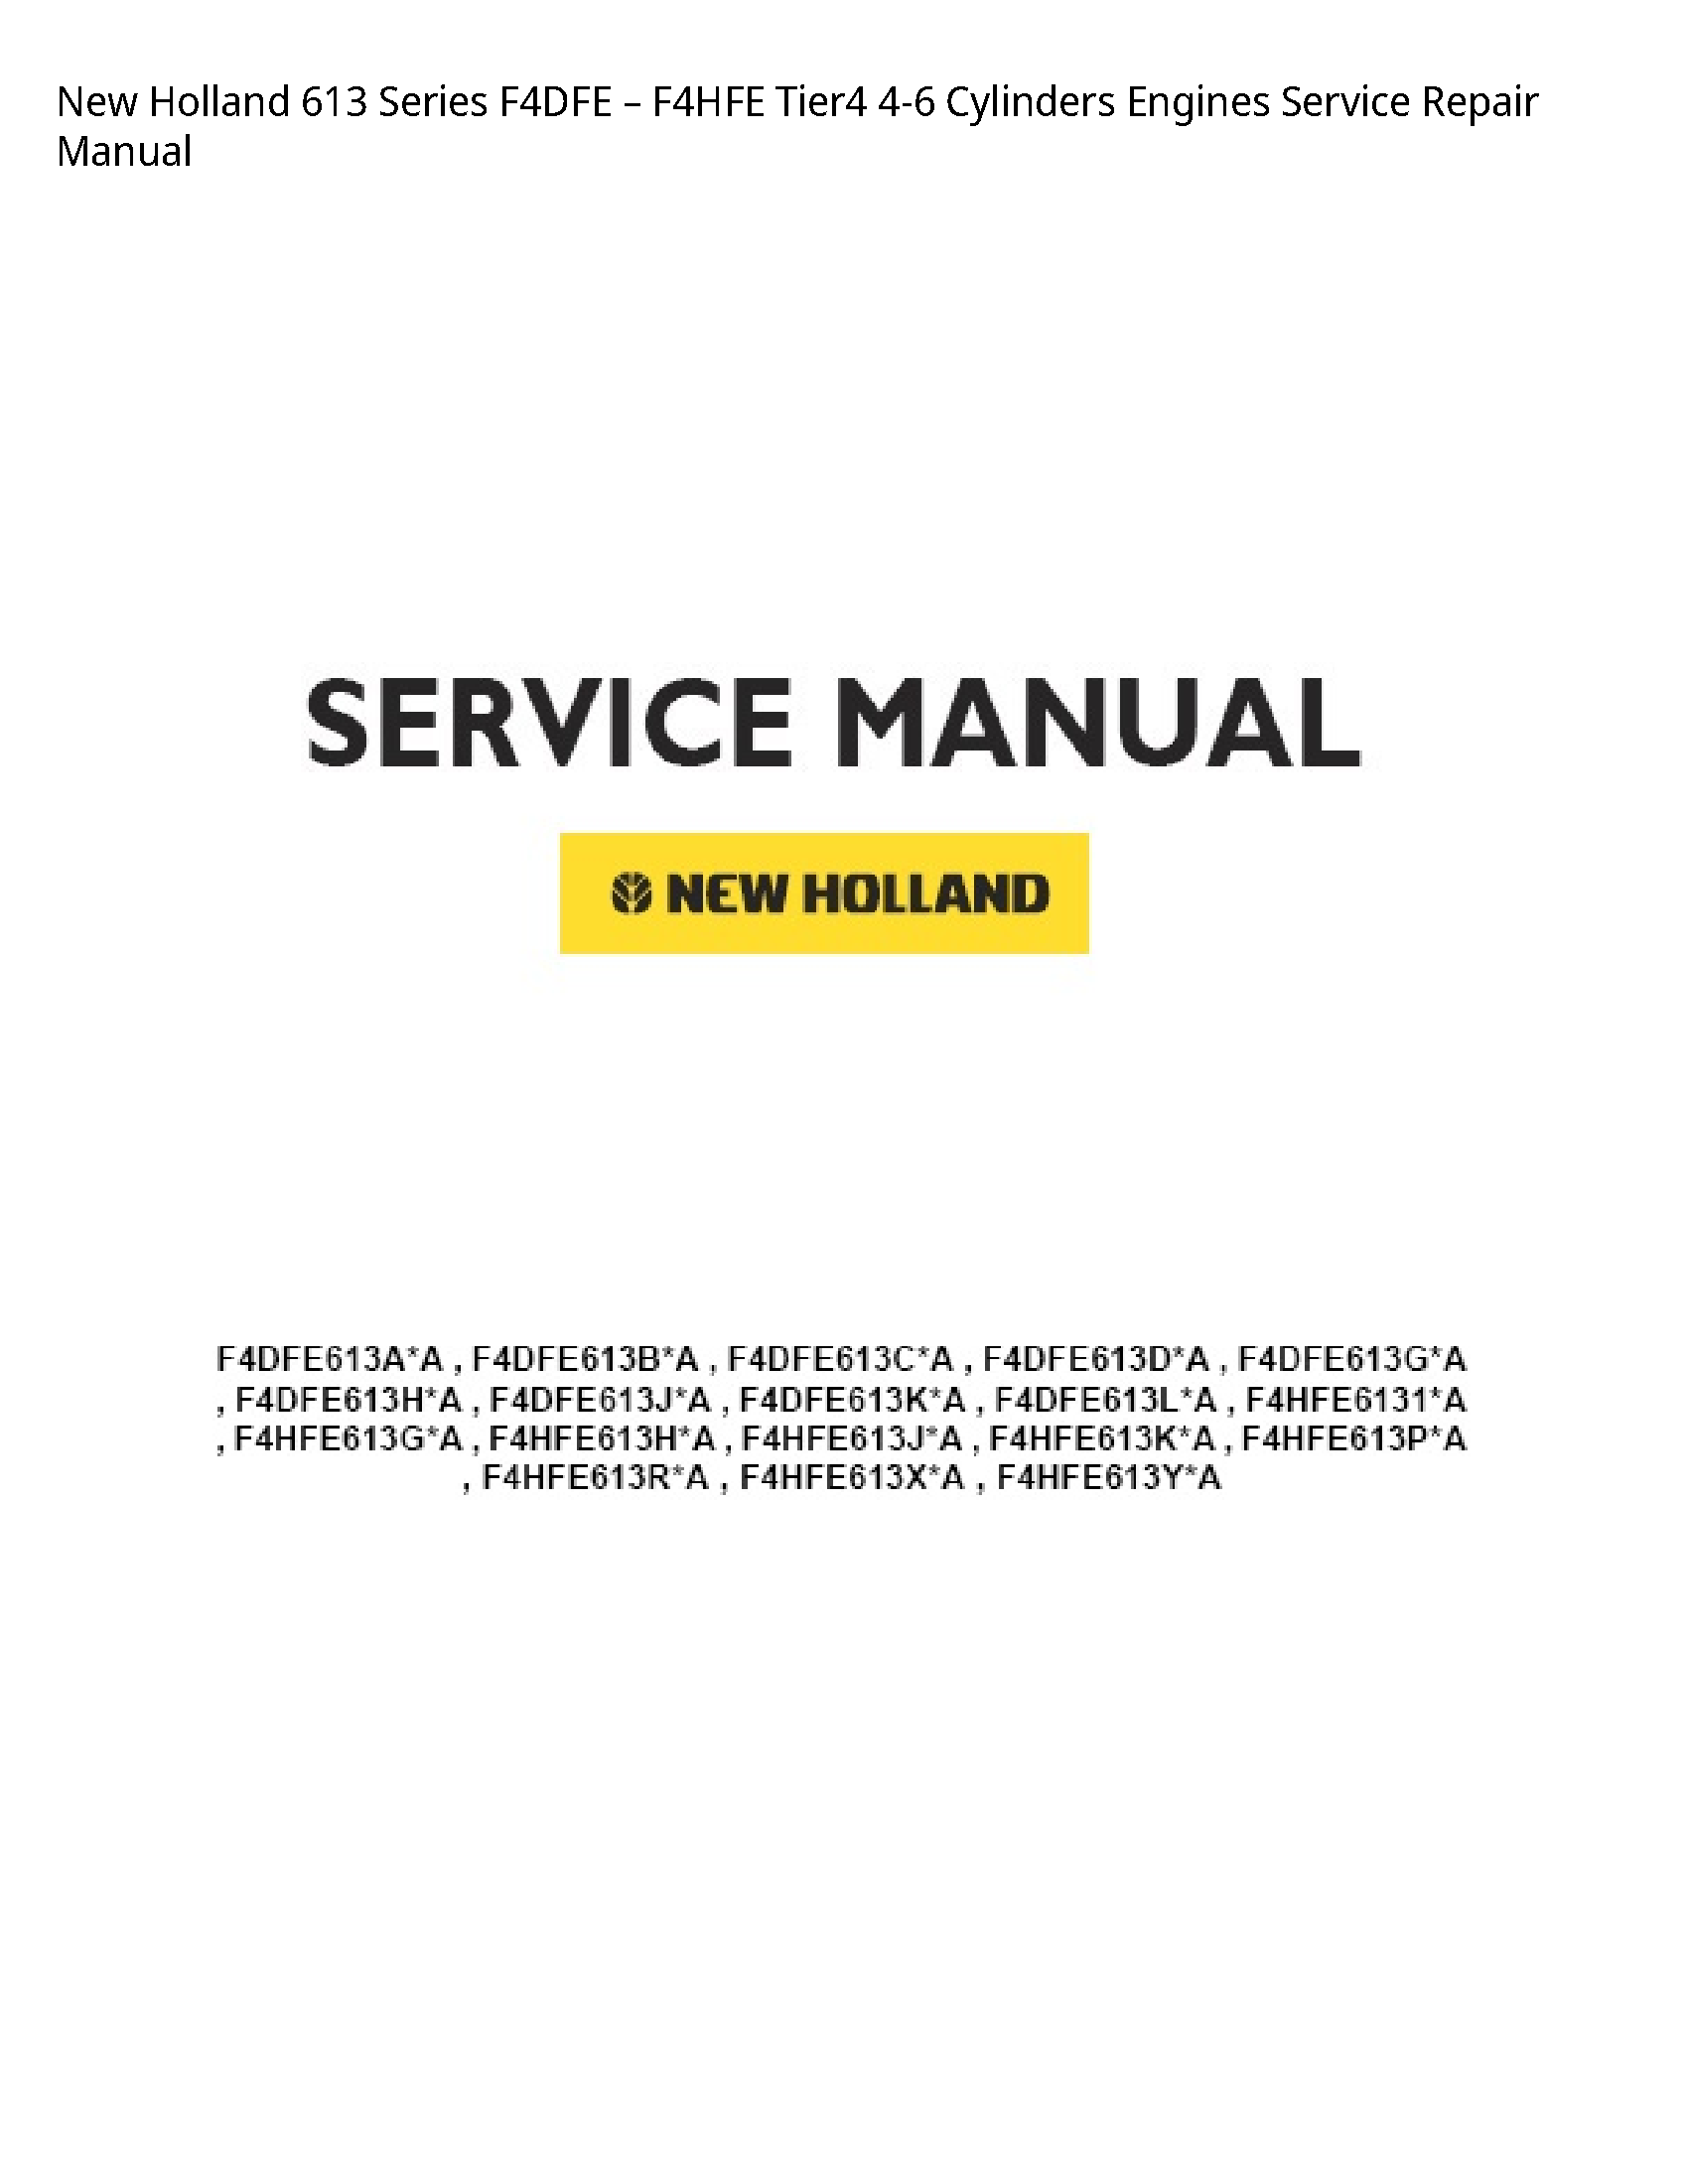 New Holland 613 Series Cylinders Engines manual